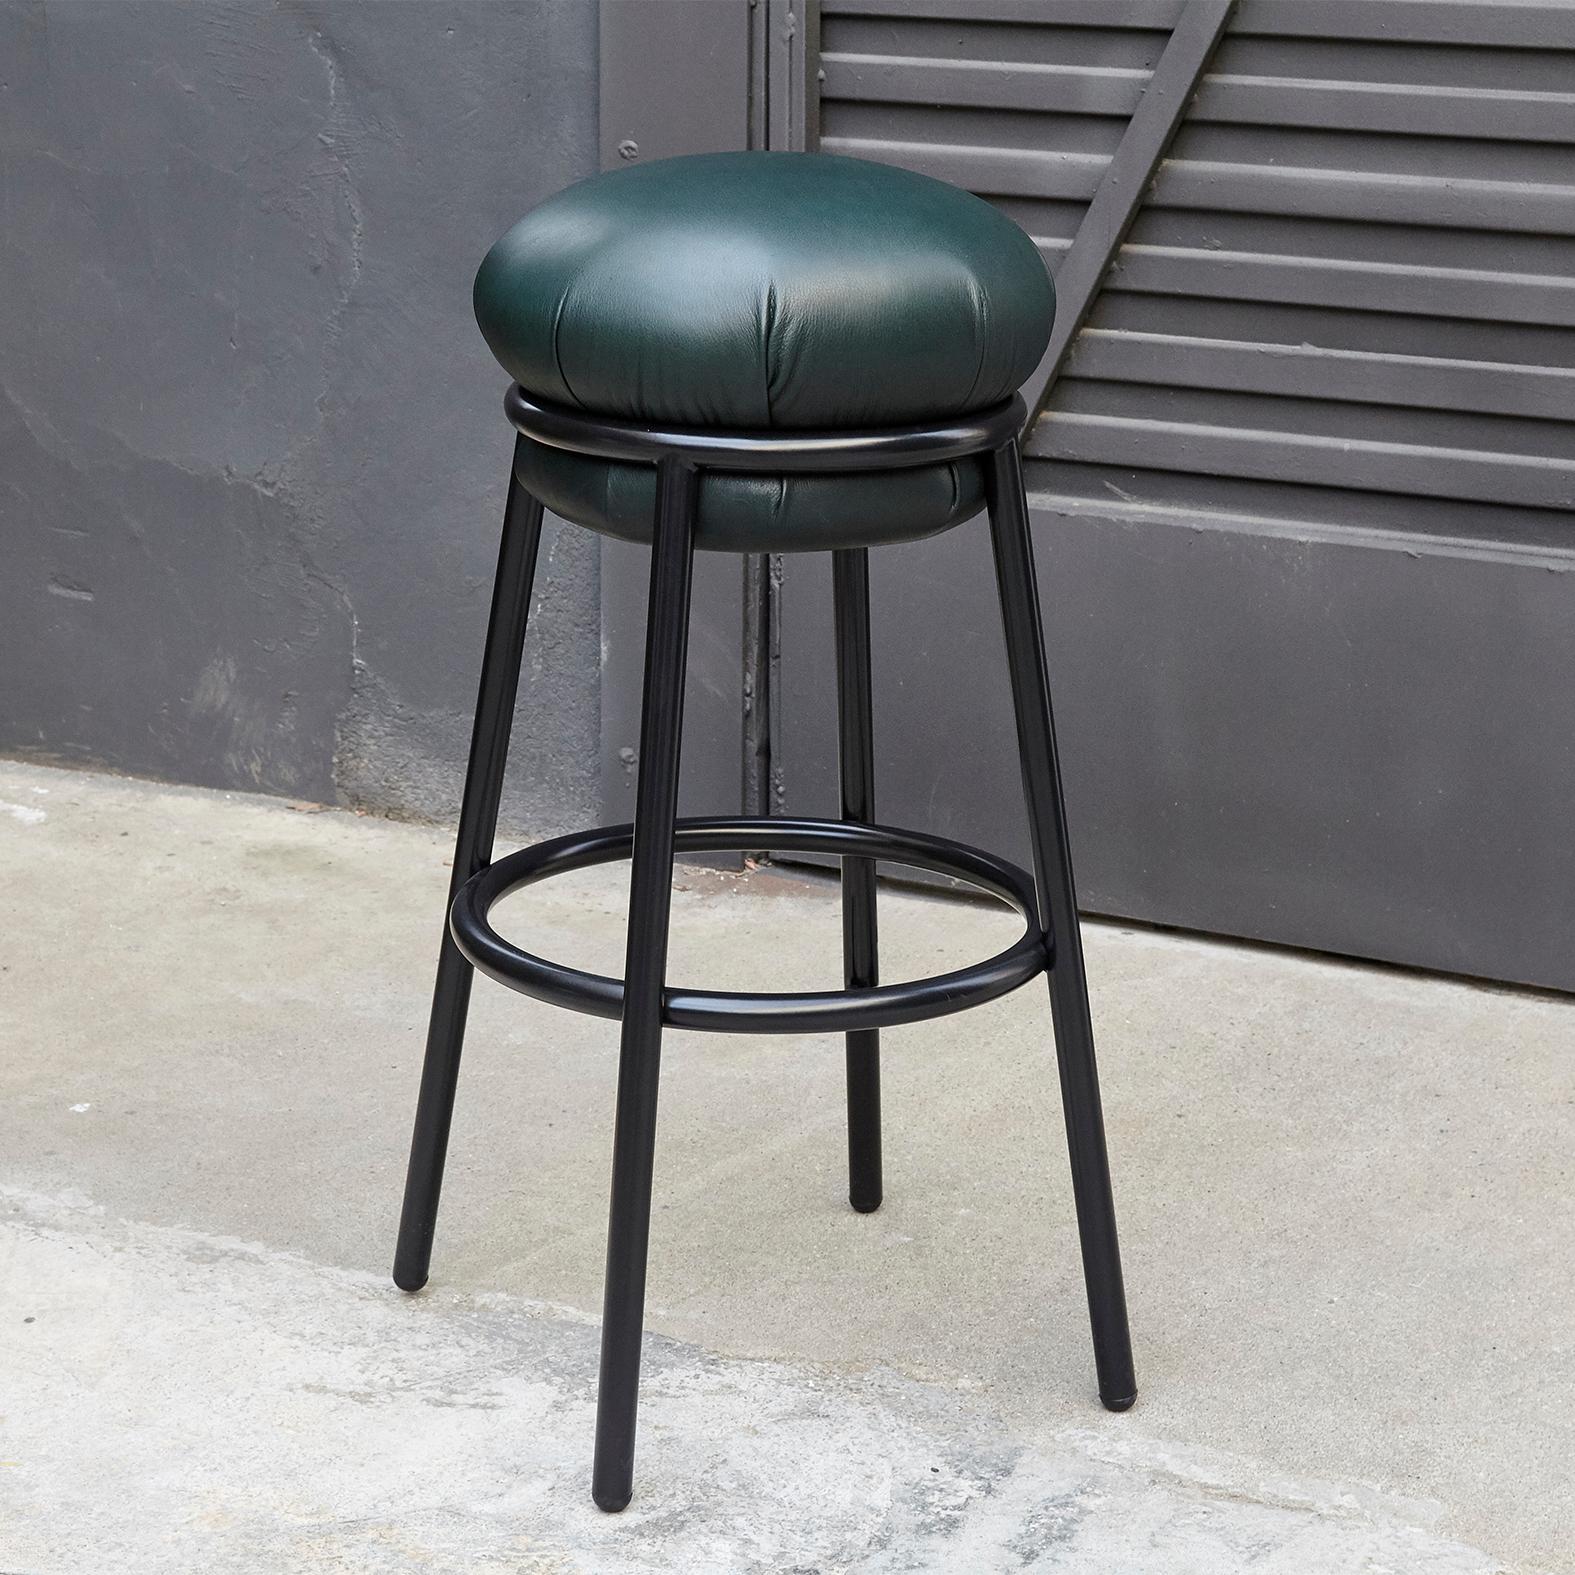 Stool designed by Stephen Burks

Black iron tubular (25mm) structured armchair. Seat upholstered in blue leather with blue structure.

The leather upholstery oozes over the bare iron structure. 

Measure: Ø 36 x H 80 cm

Year: 2018.

In